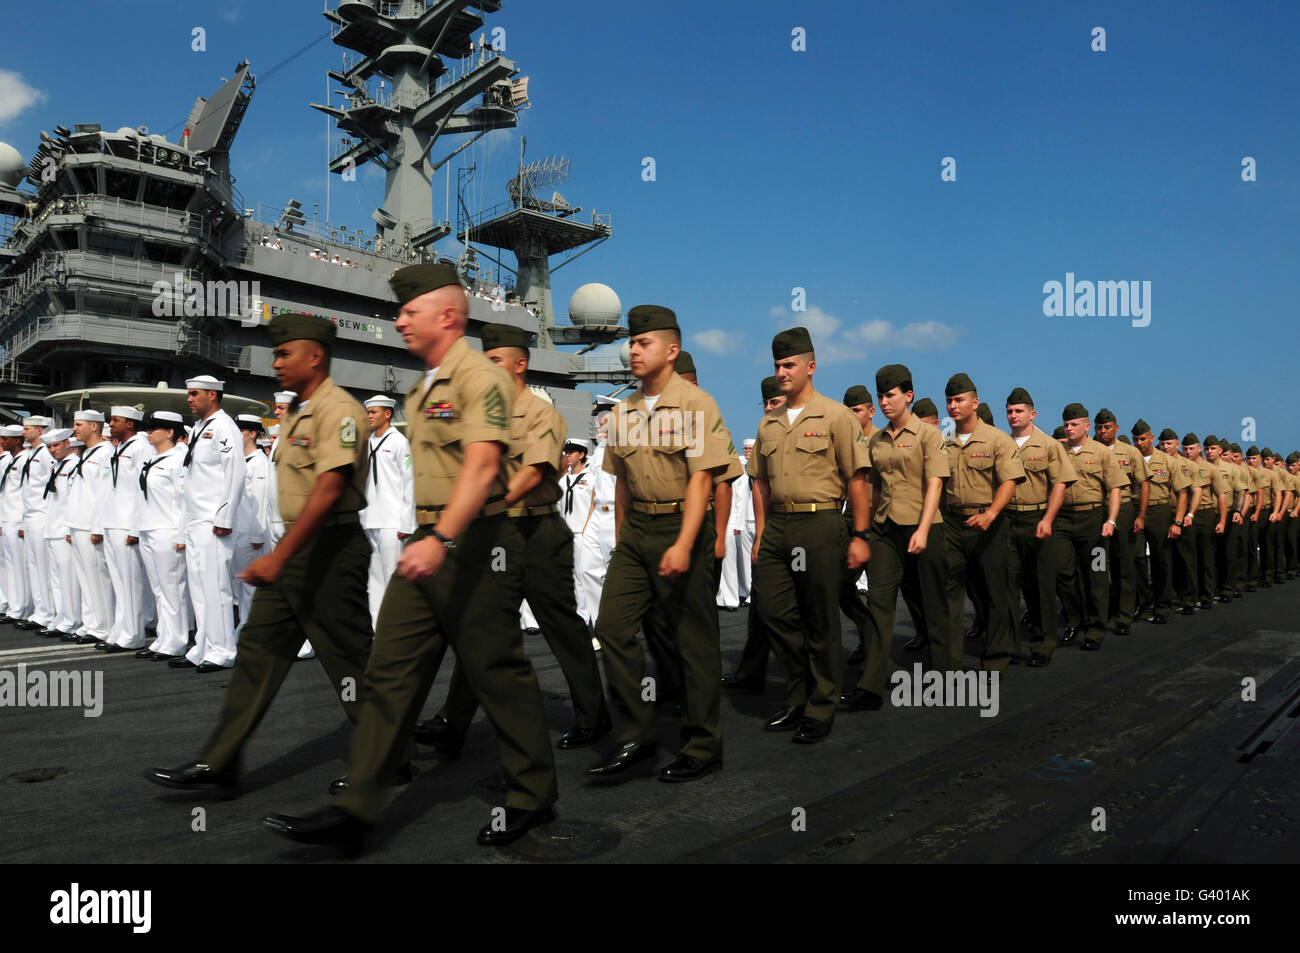 U.S. Marines march in formation to move into position to man the rails with sailors aboard USS Ronald Reagan. Stock Photo